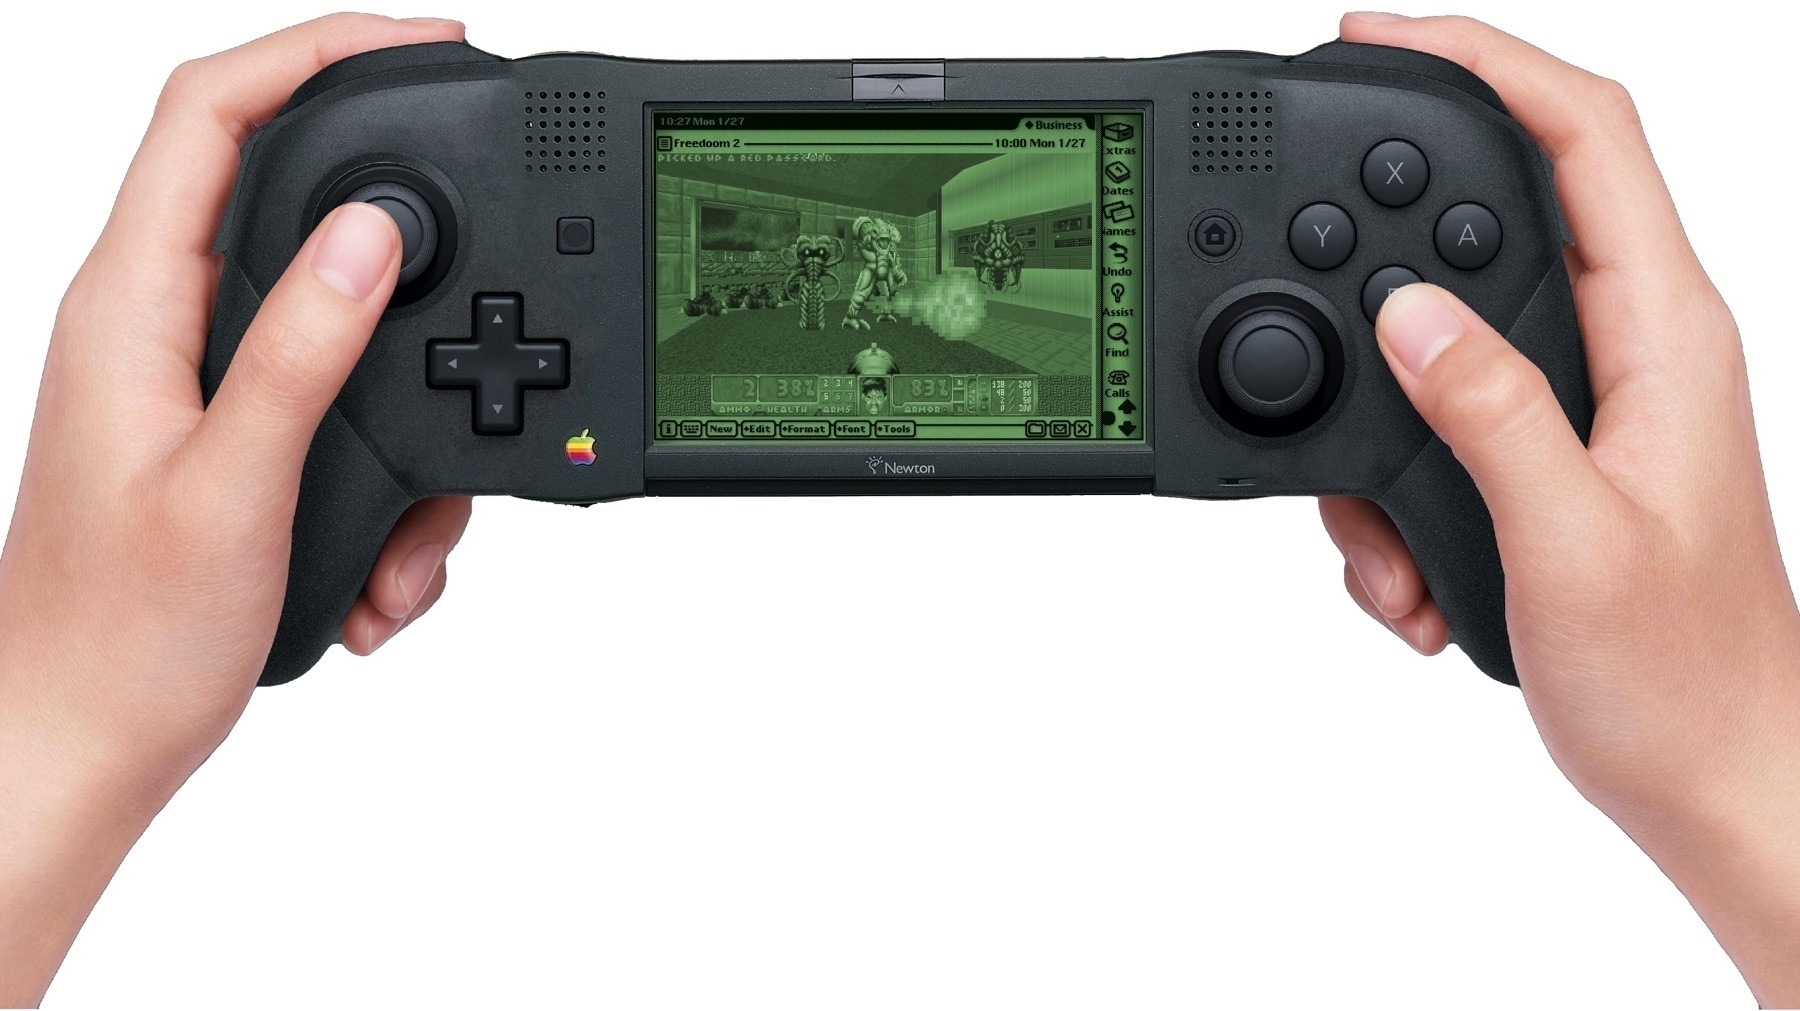 Apple Newton MessagePad with a built-in Nintendo Switch Pro controller playing Freedoom 2.